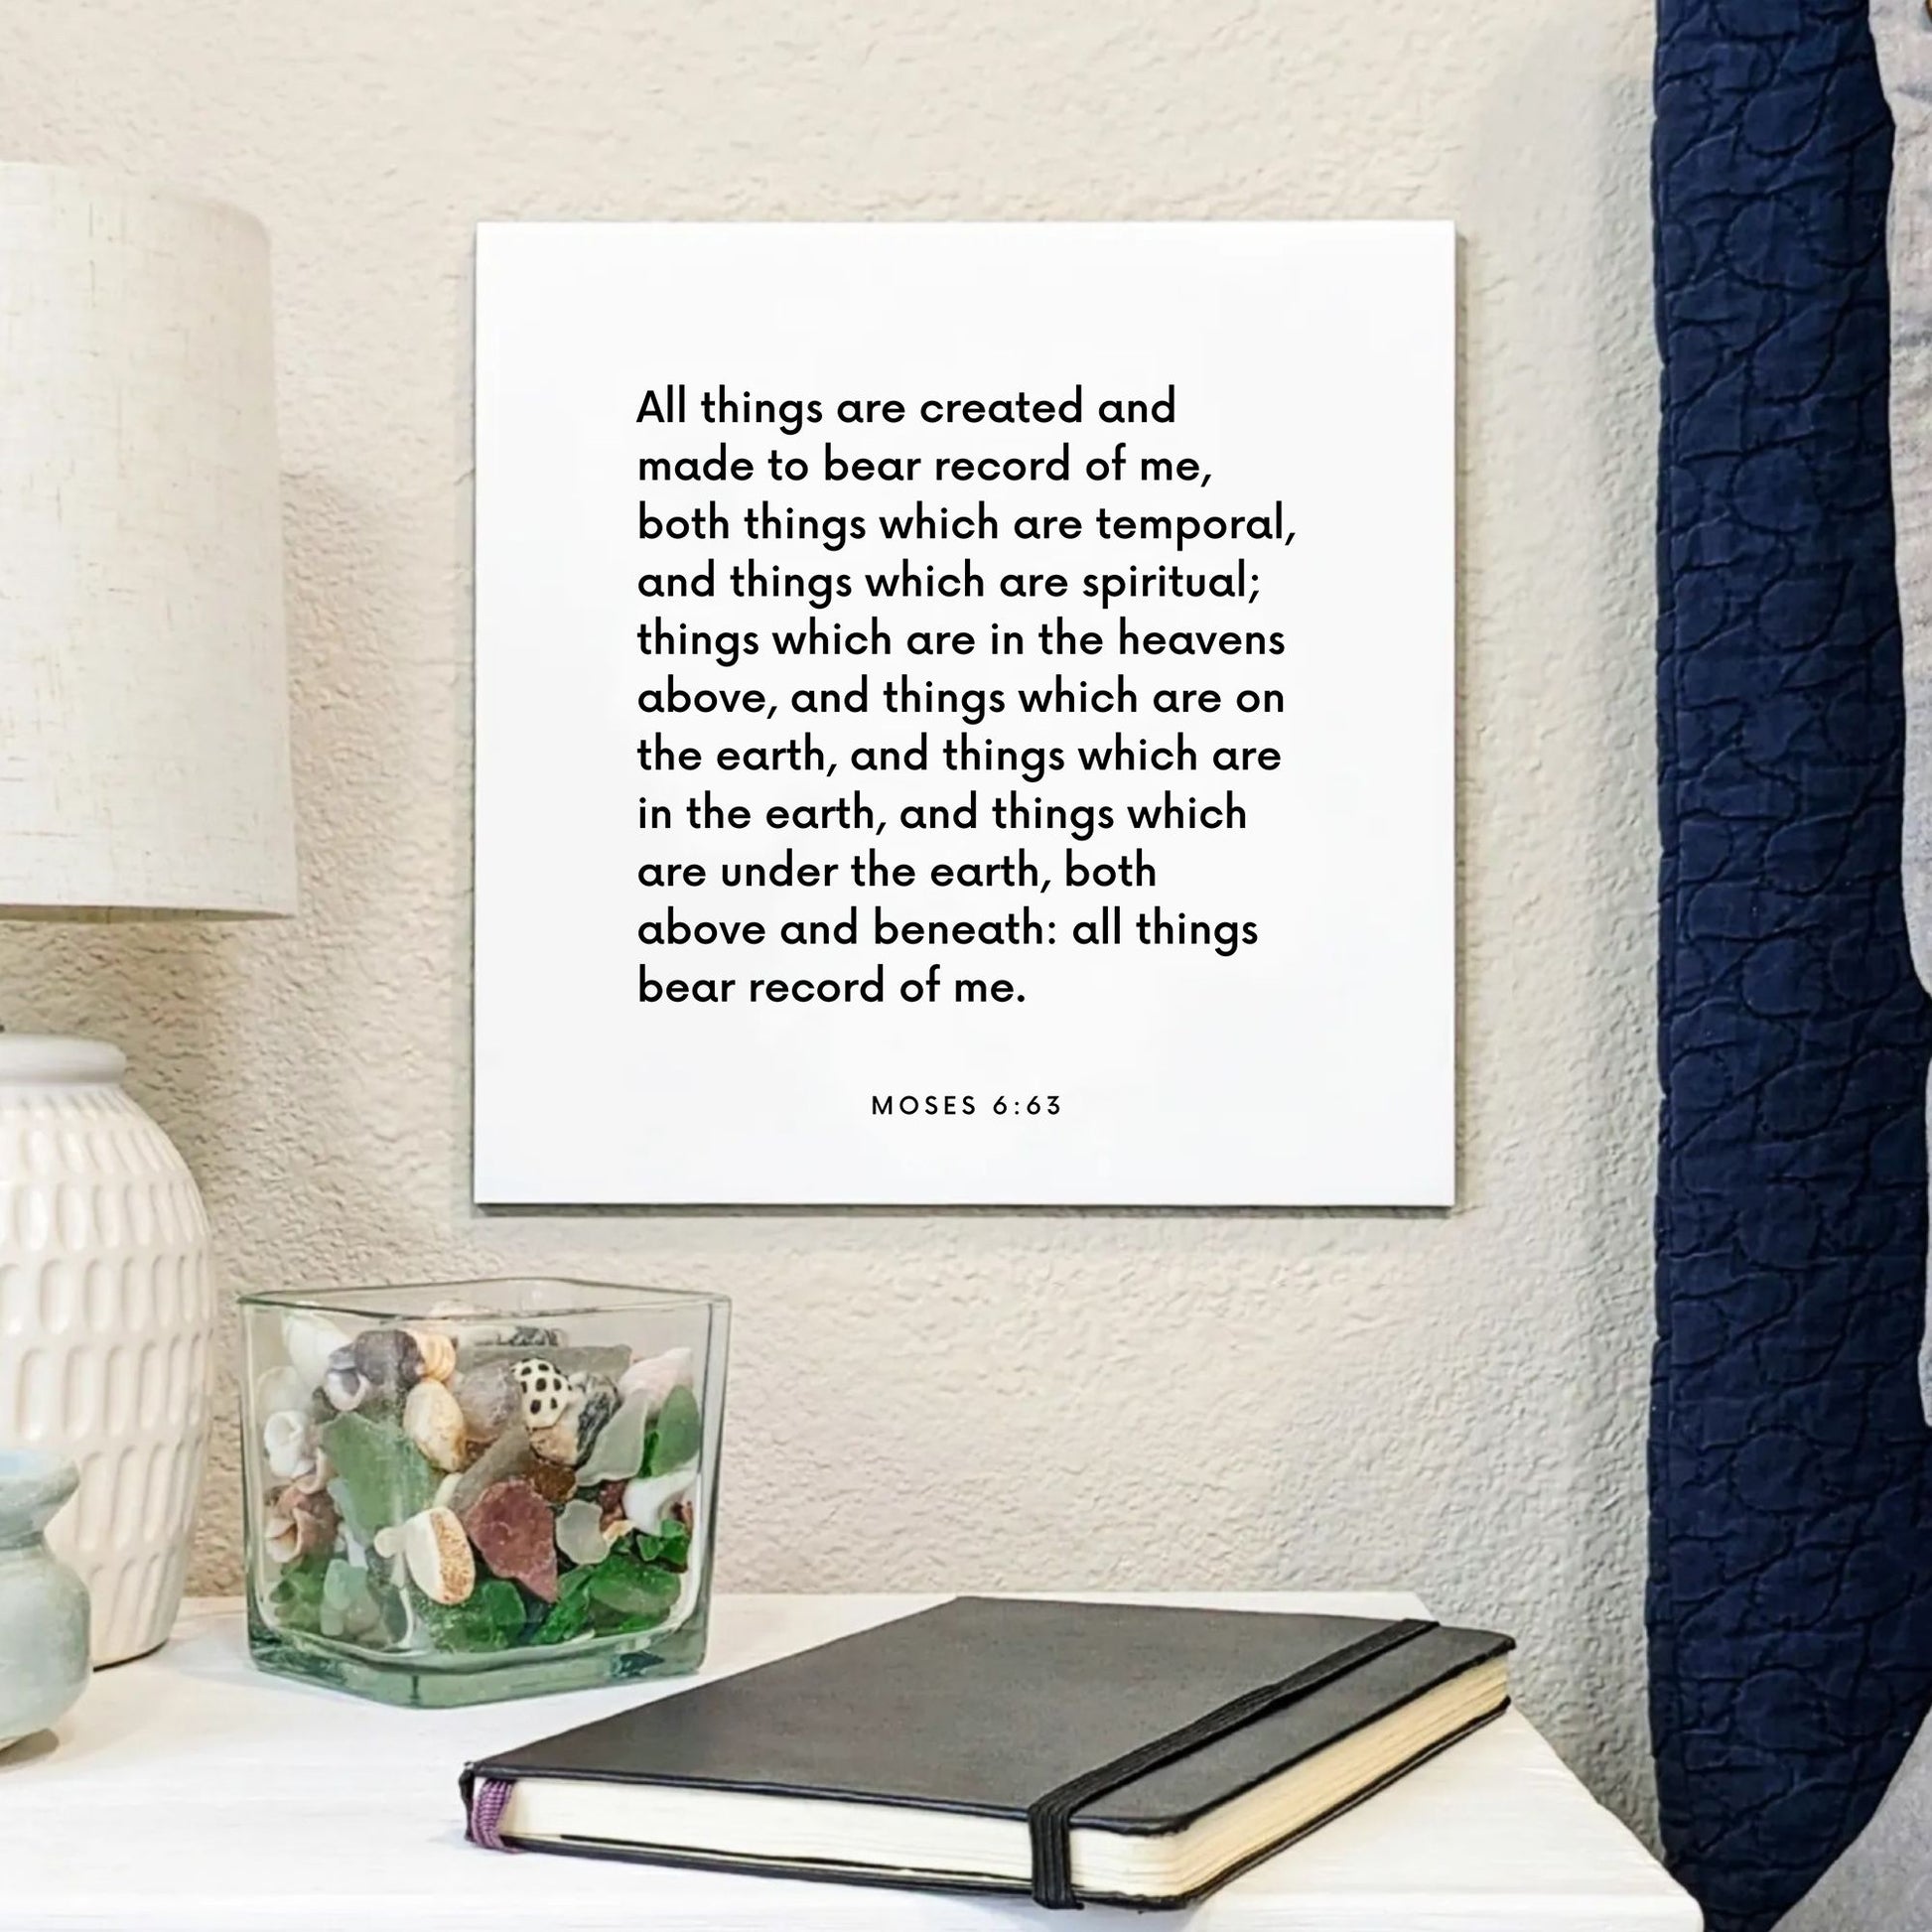 Bedside mouting of the scripture tile for Moses 6:63 - "All things bear record of me"